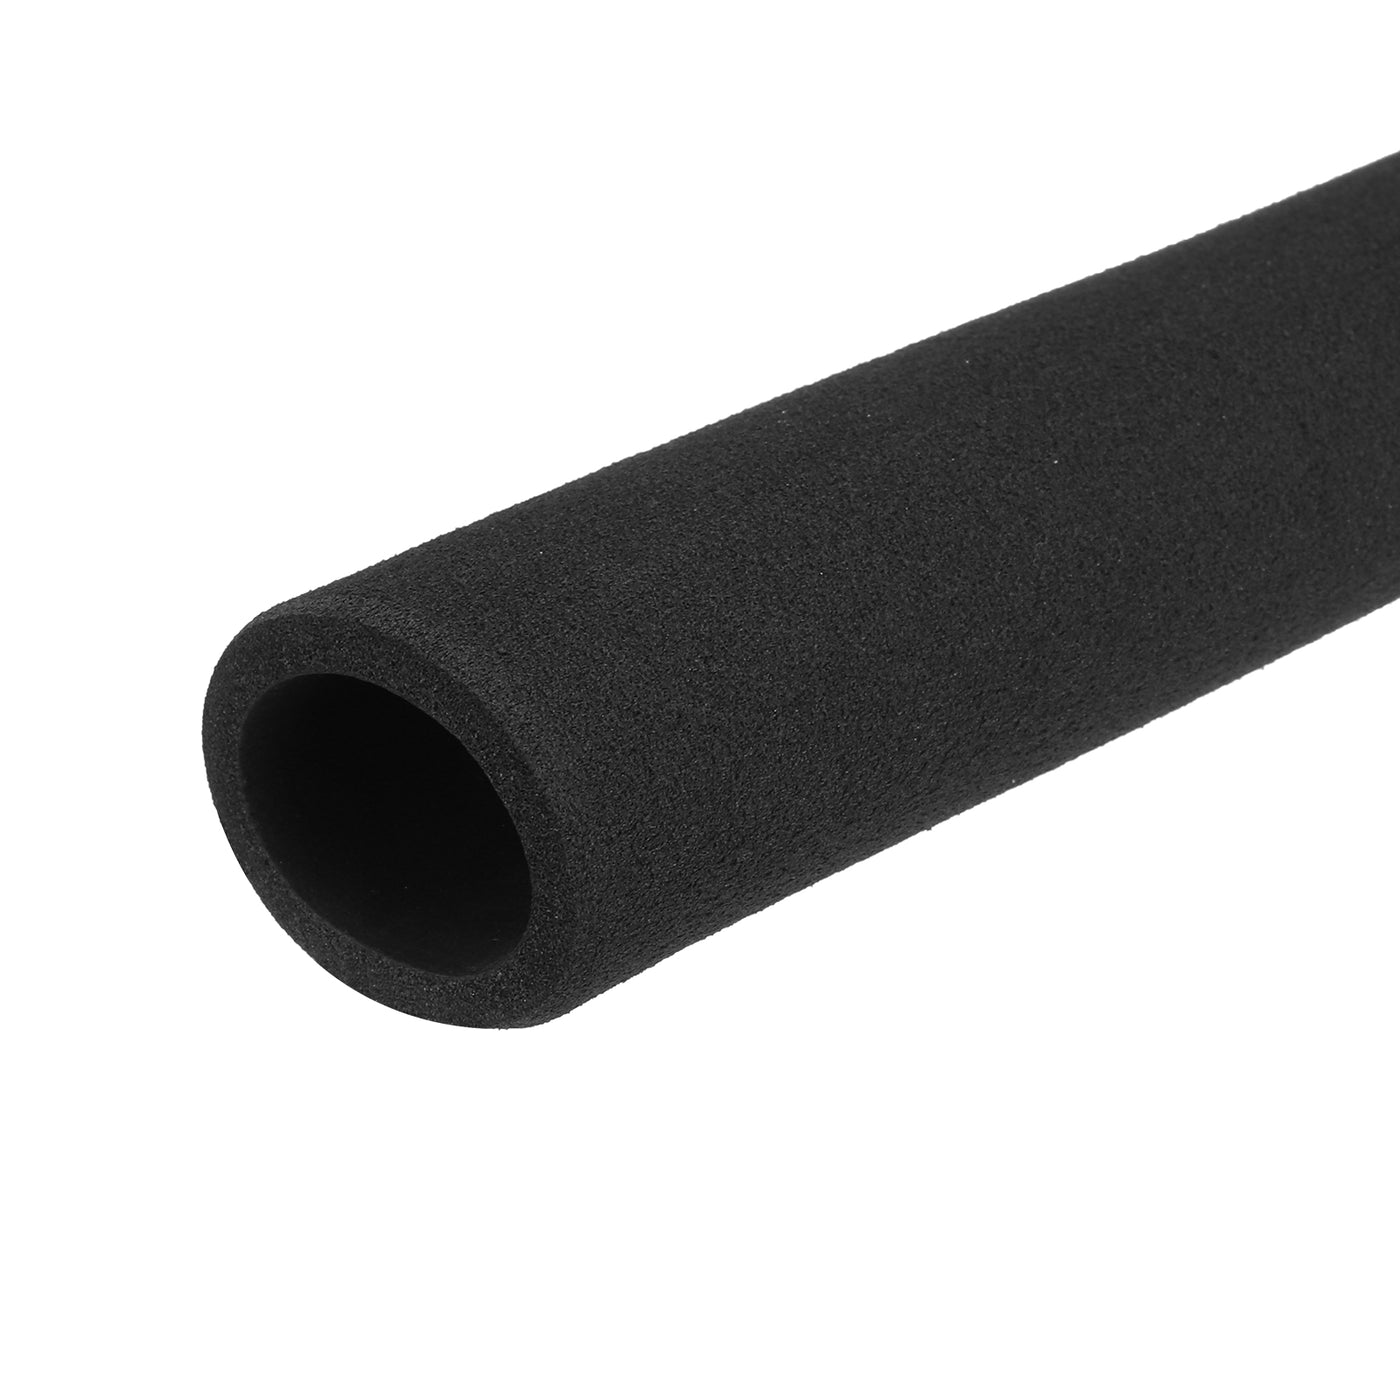 uxcell Uxcell Pipe Insulation Tube Foam Tubing for Handle Grip Support 27mm ID 37mm OD 390mm Heat Preservation Black